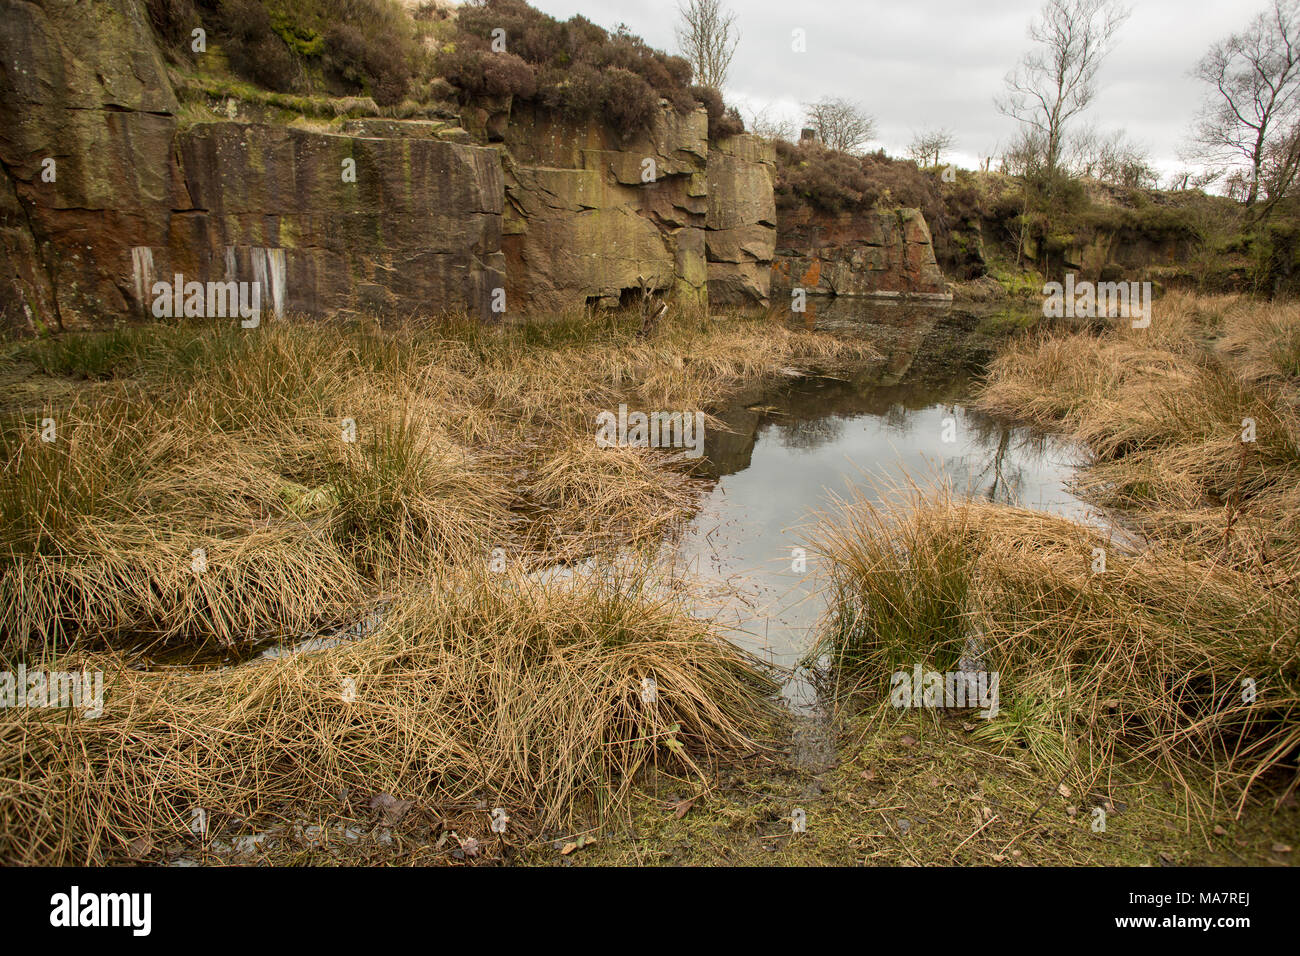 The 'Lake' area of Brownstones quarry with tussocks of tawny winter grass and a leaden sky. Stock Photo